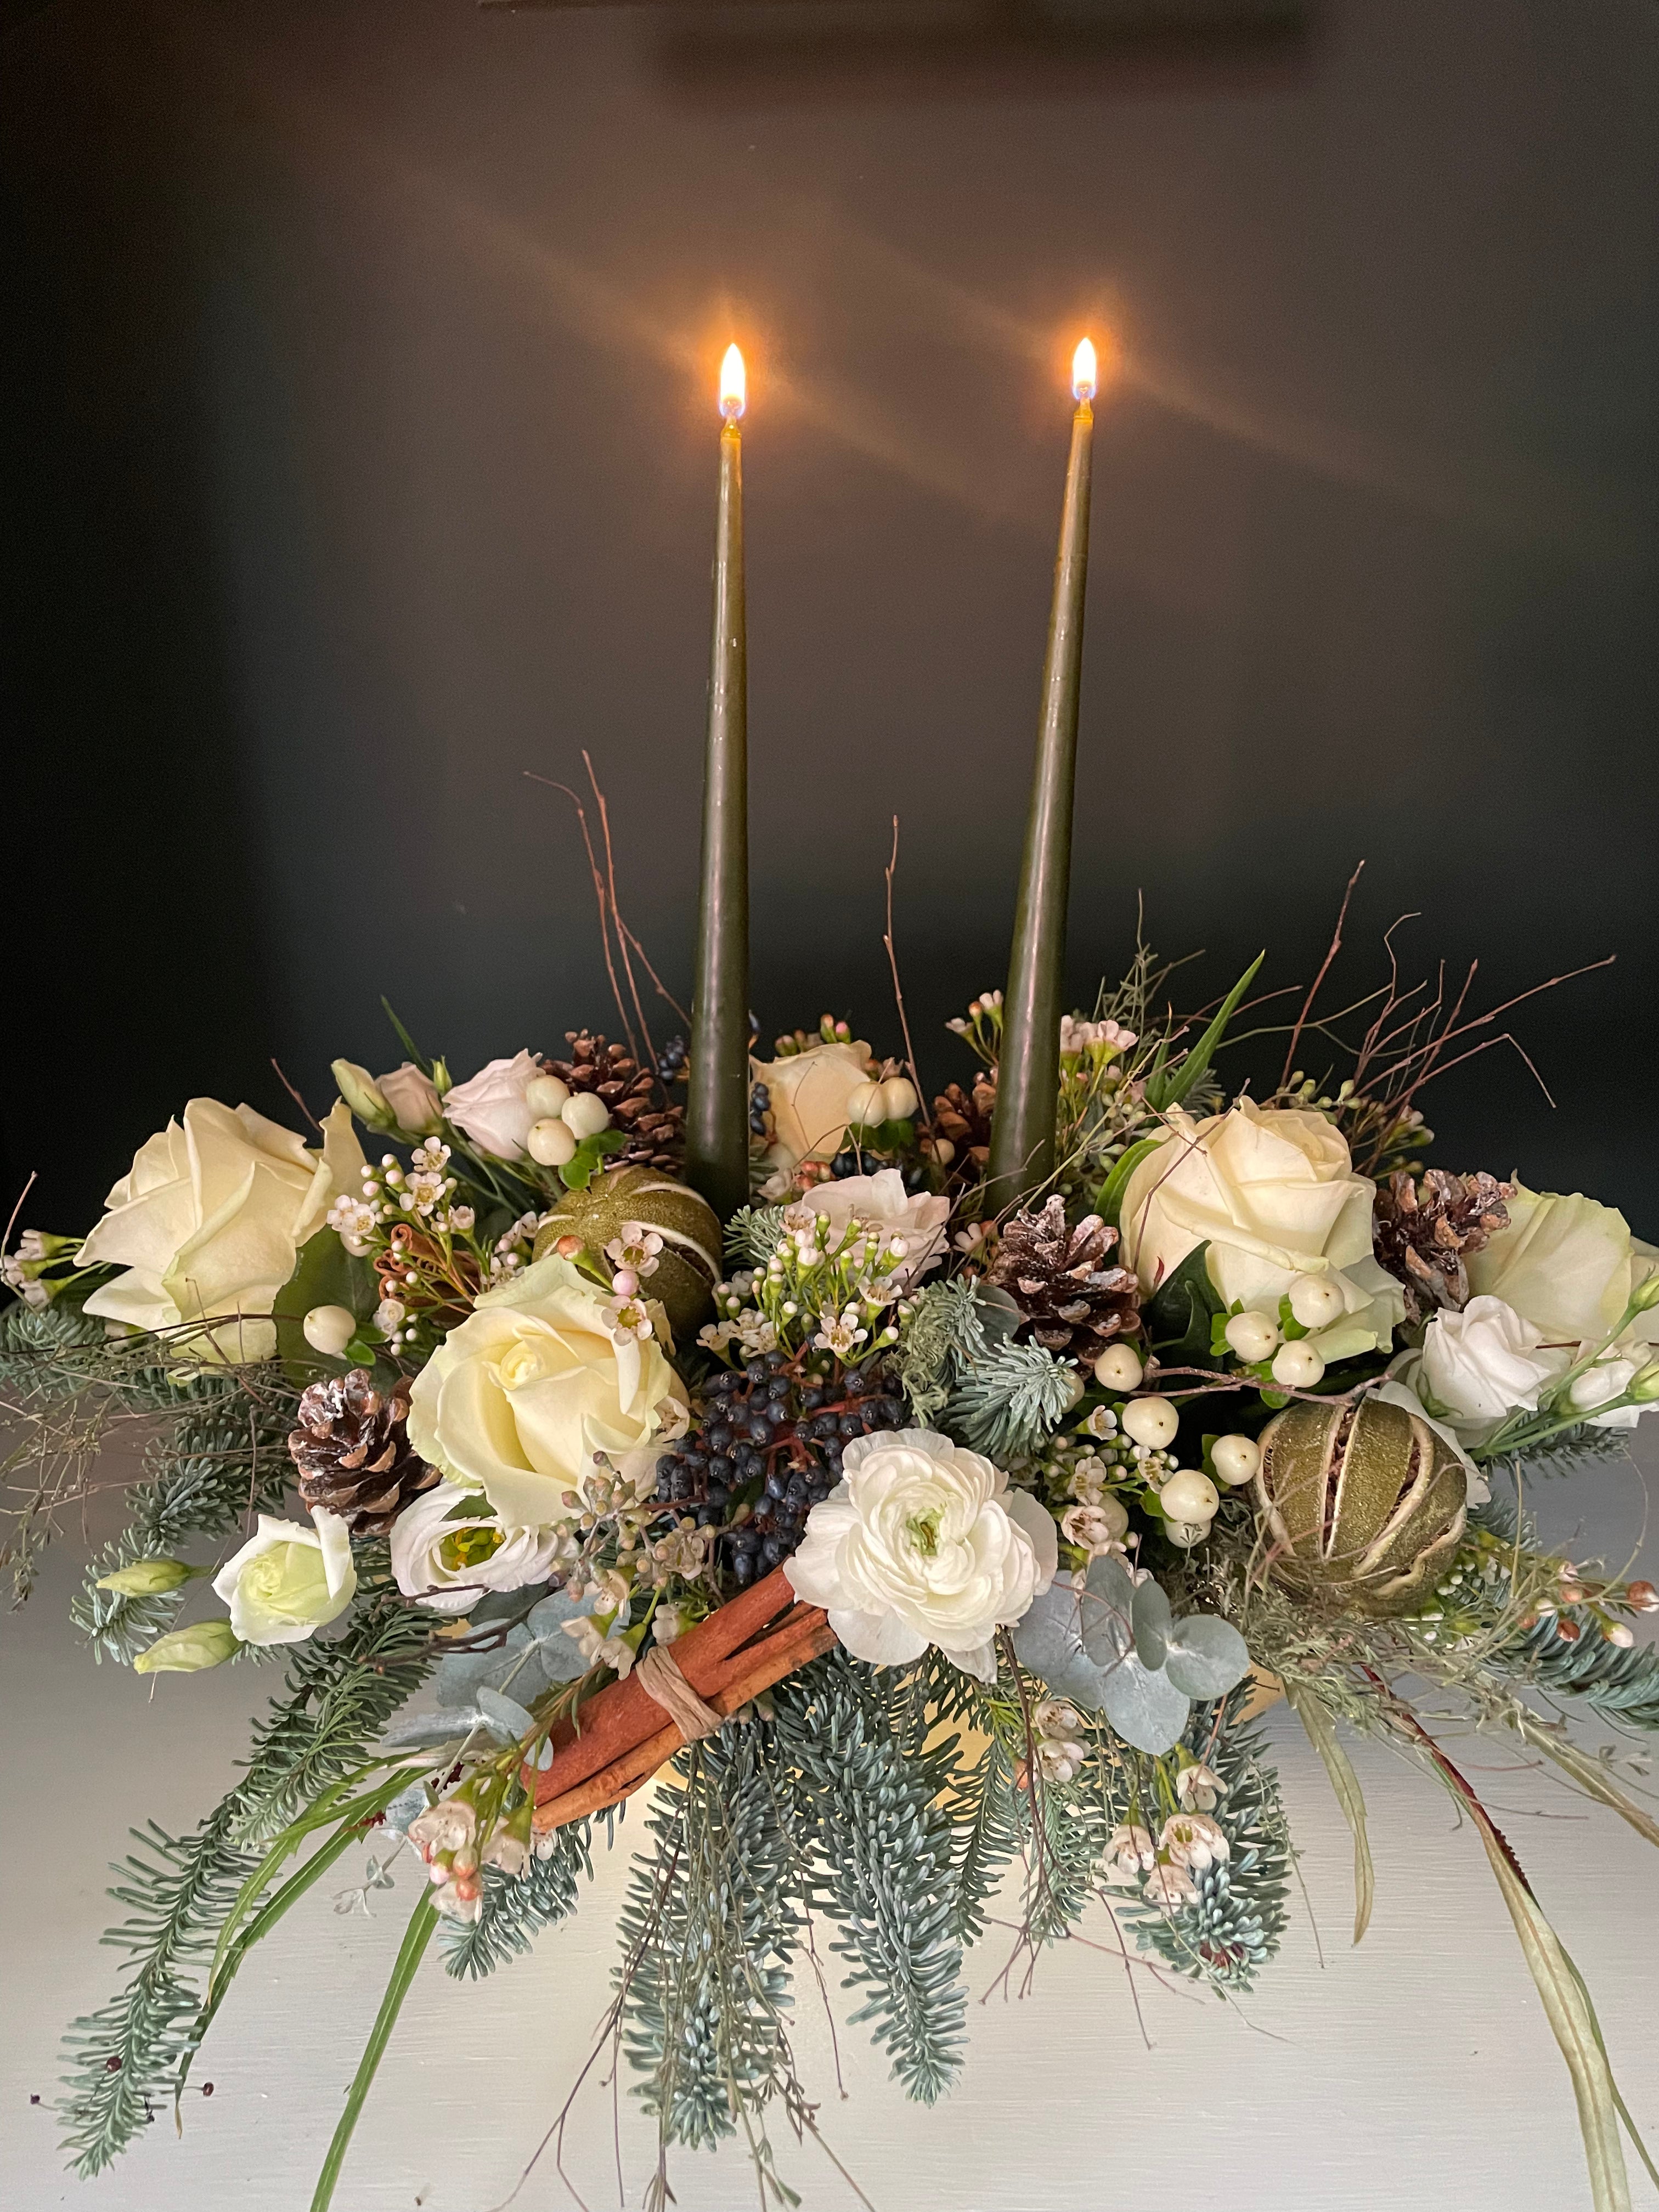 Luxury White and Gold Candle Arrangement